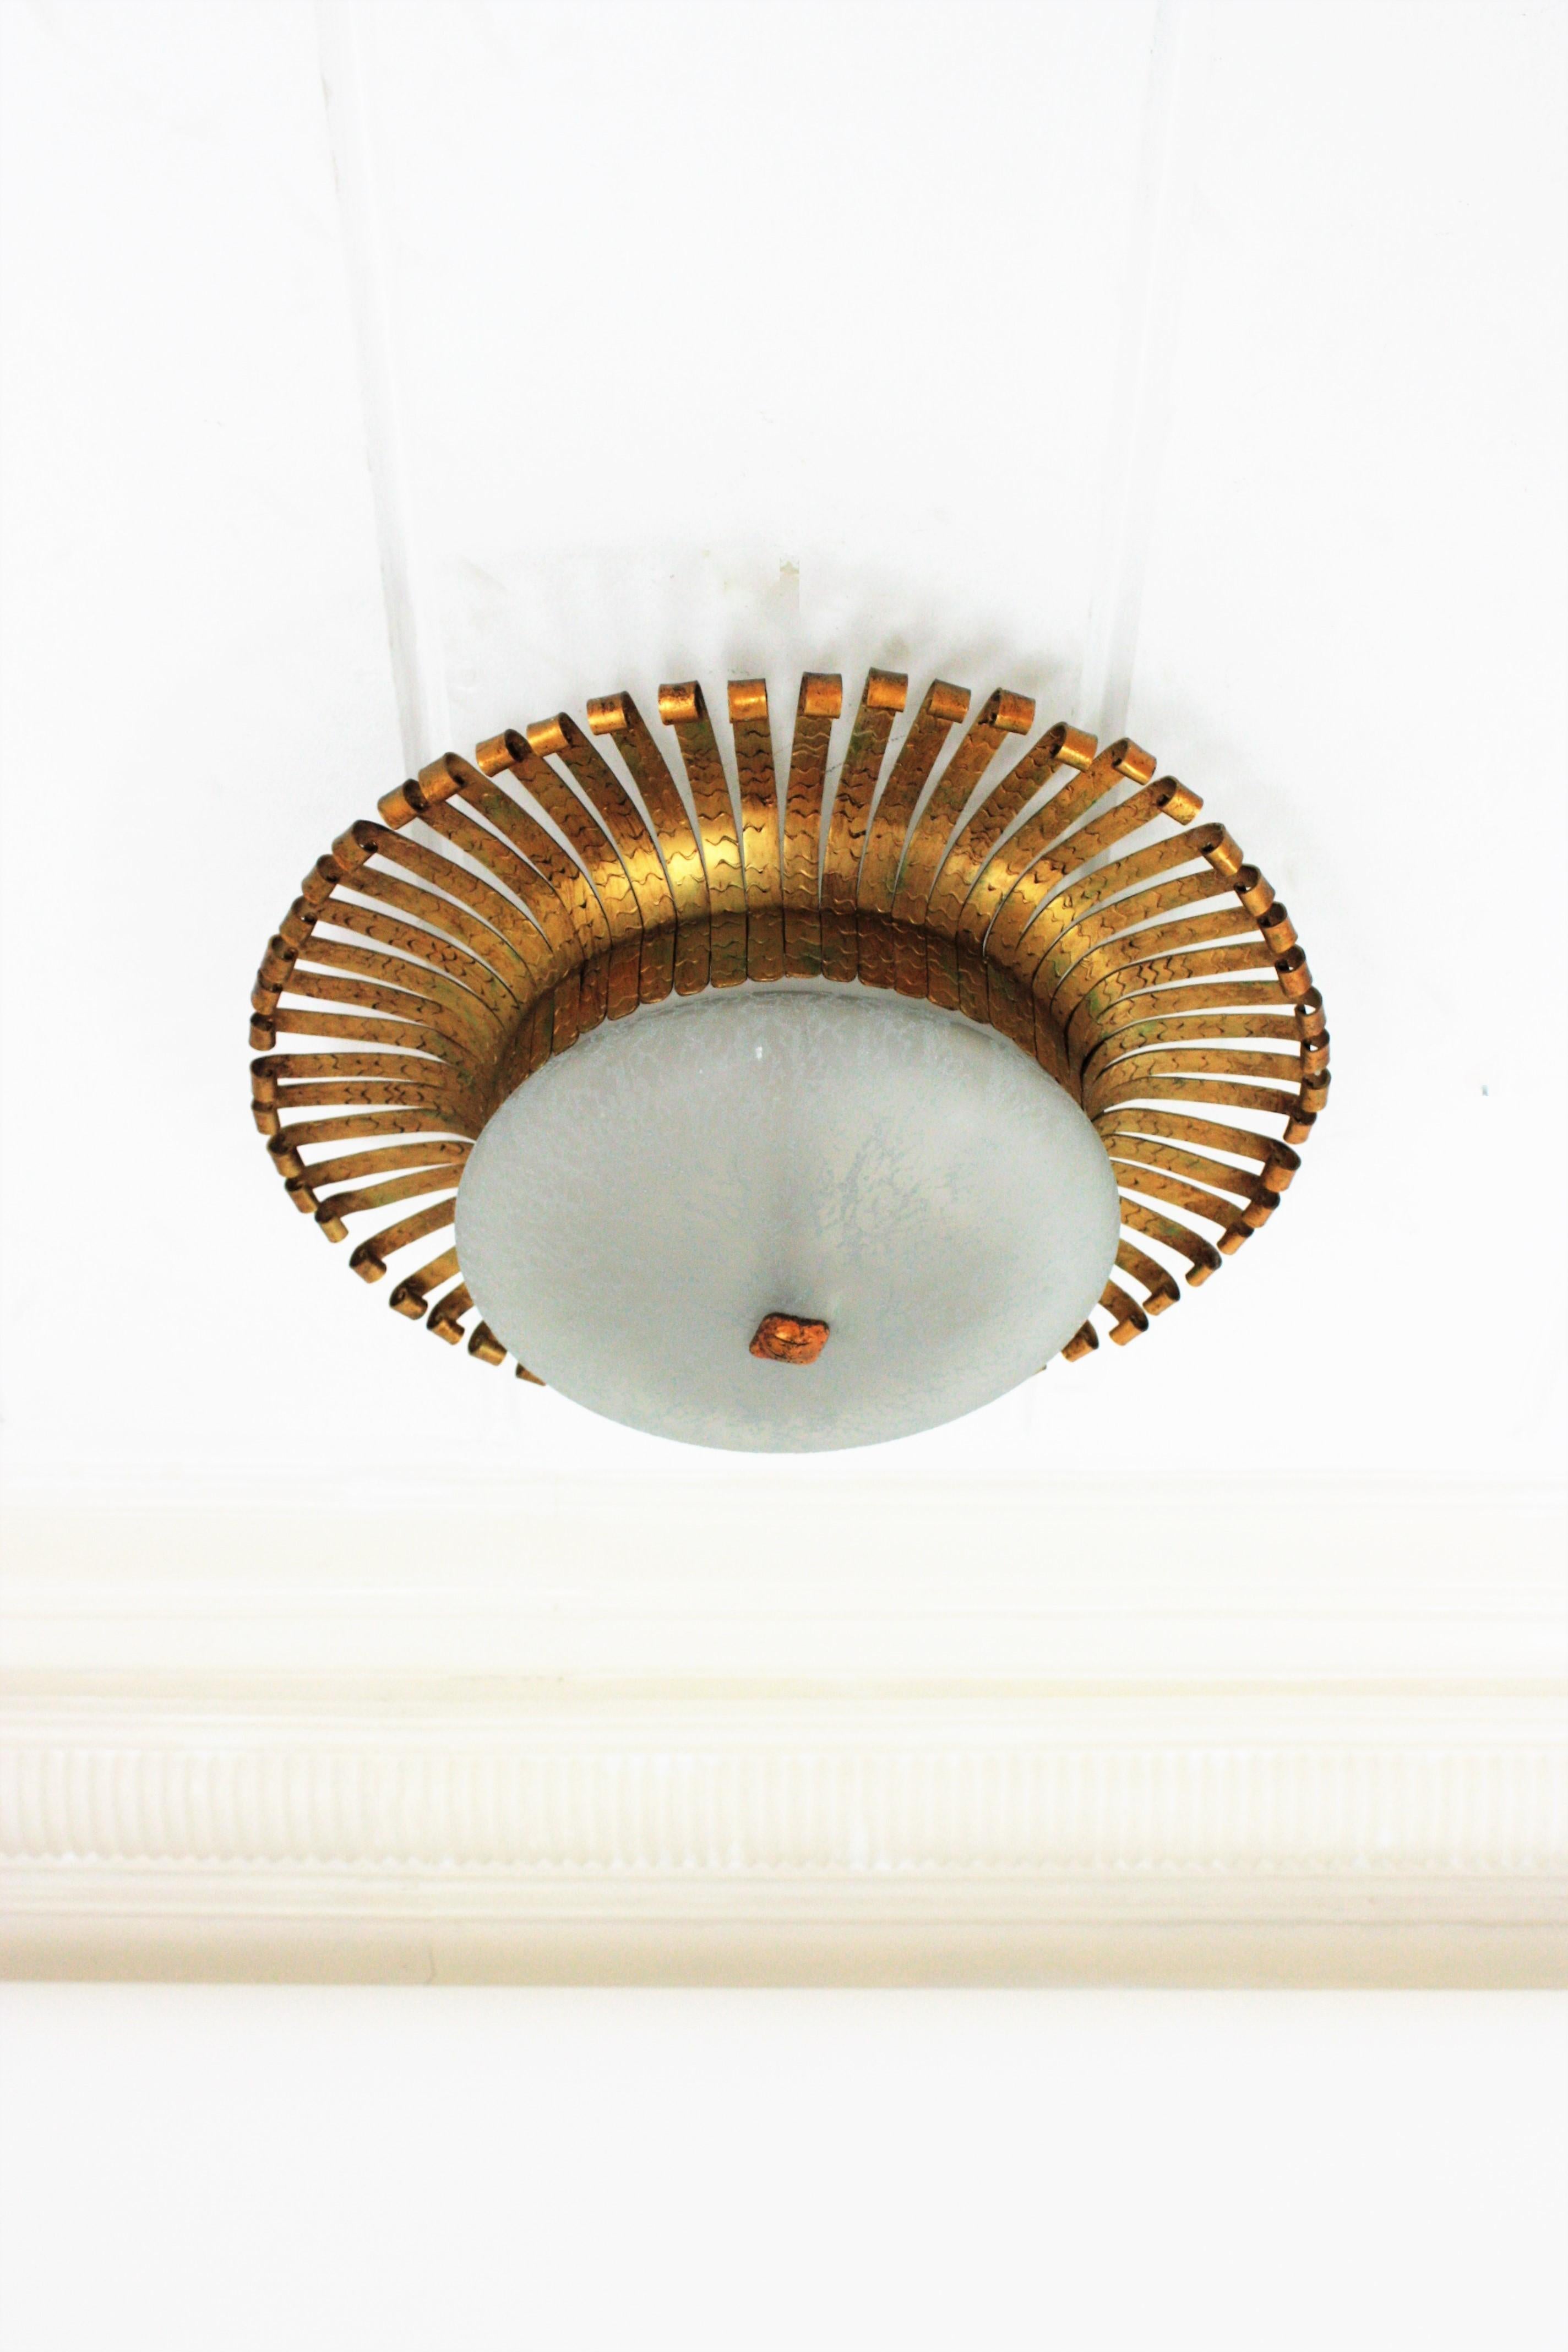 Eyelash sunburst light fixture in gilt iron and glass, Spain, 1950s-1960s.
This flush mount or wall light features a sunburst iron backplate surrounding a central frosted glass globe lampshade.
Handcrafted in hammered iron with gold leaf